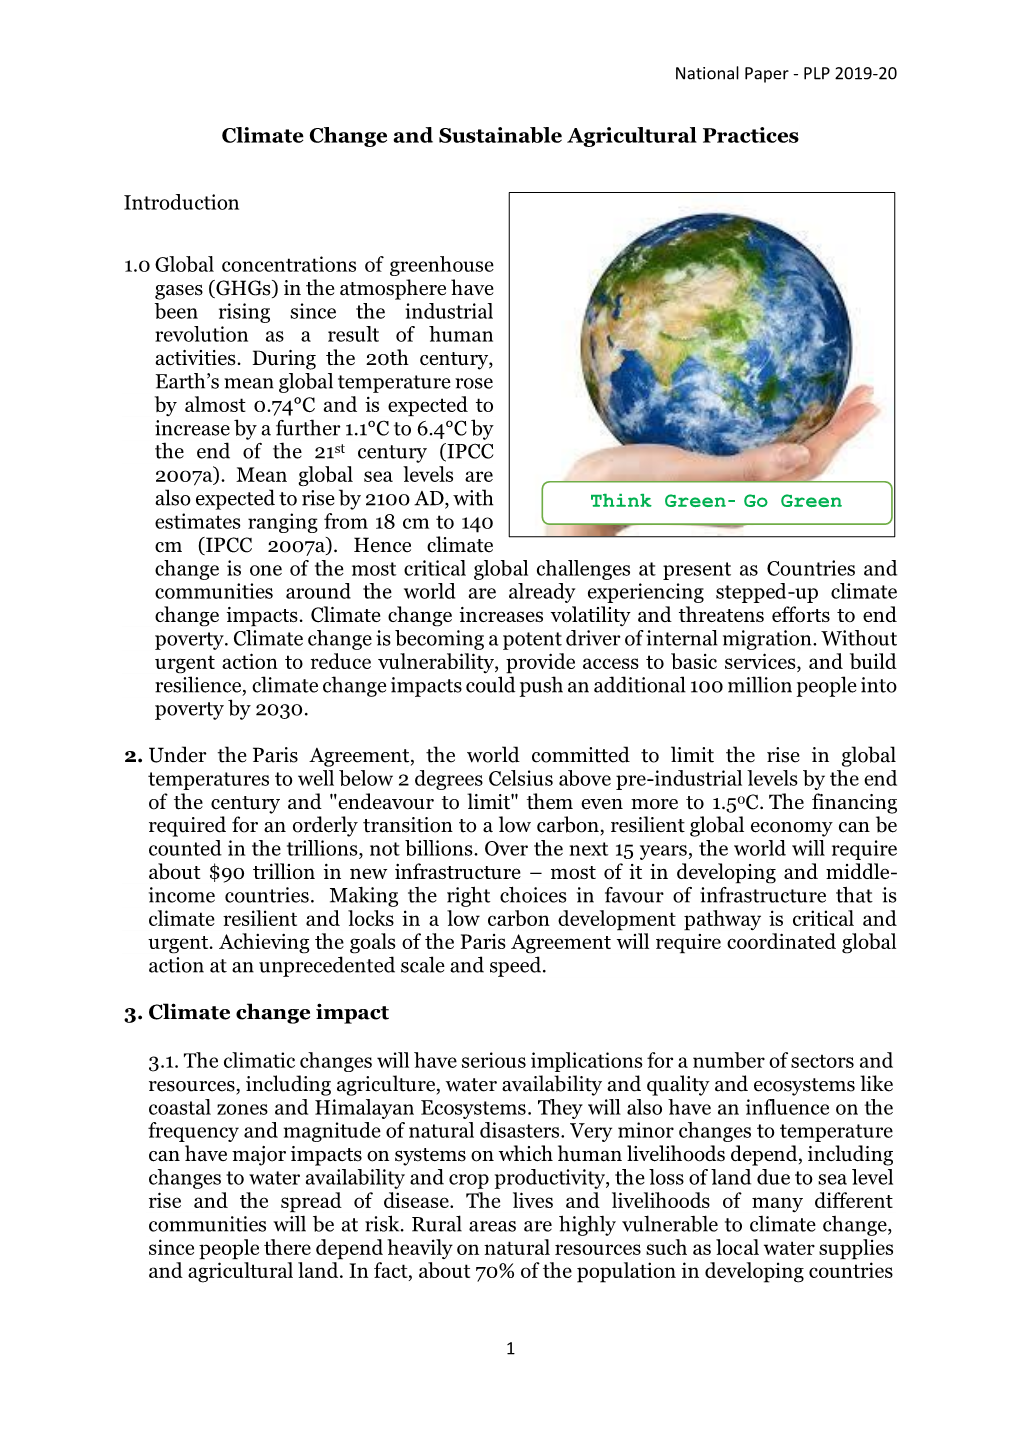 Climate Change and Sustainable Agricultural Practices